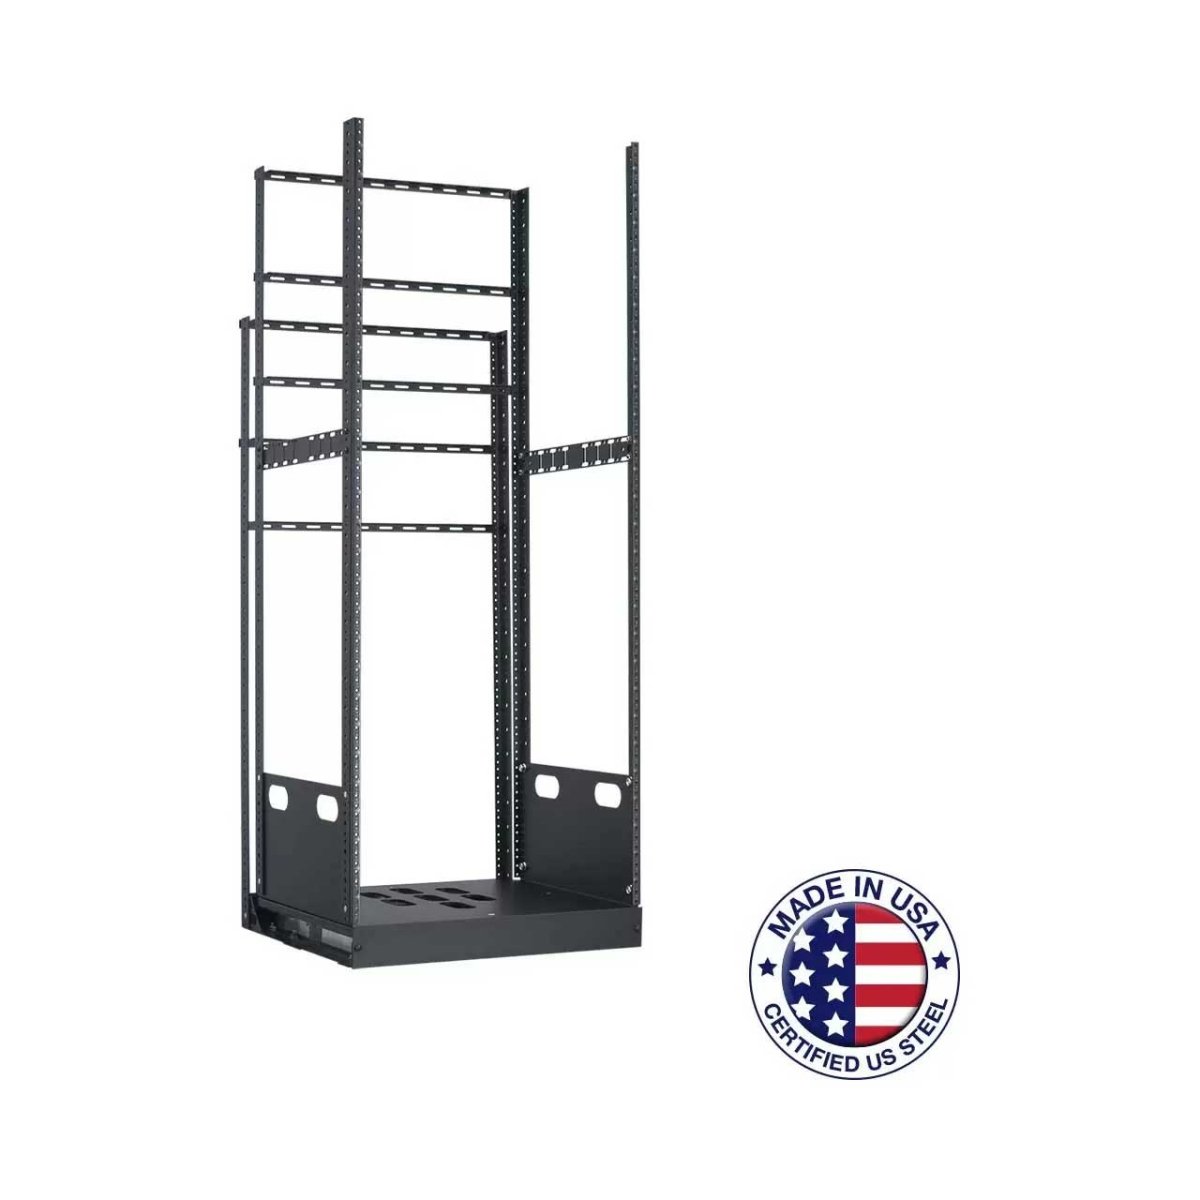 Picture of Lowell Manufacturing LMC-LPTR4-2823 LPTR4-2823 28RU Pull & Turn Millwork Rack with Four Support Rails - 23 in. Deep